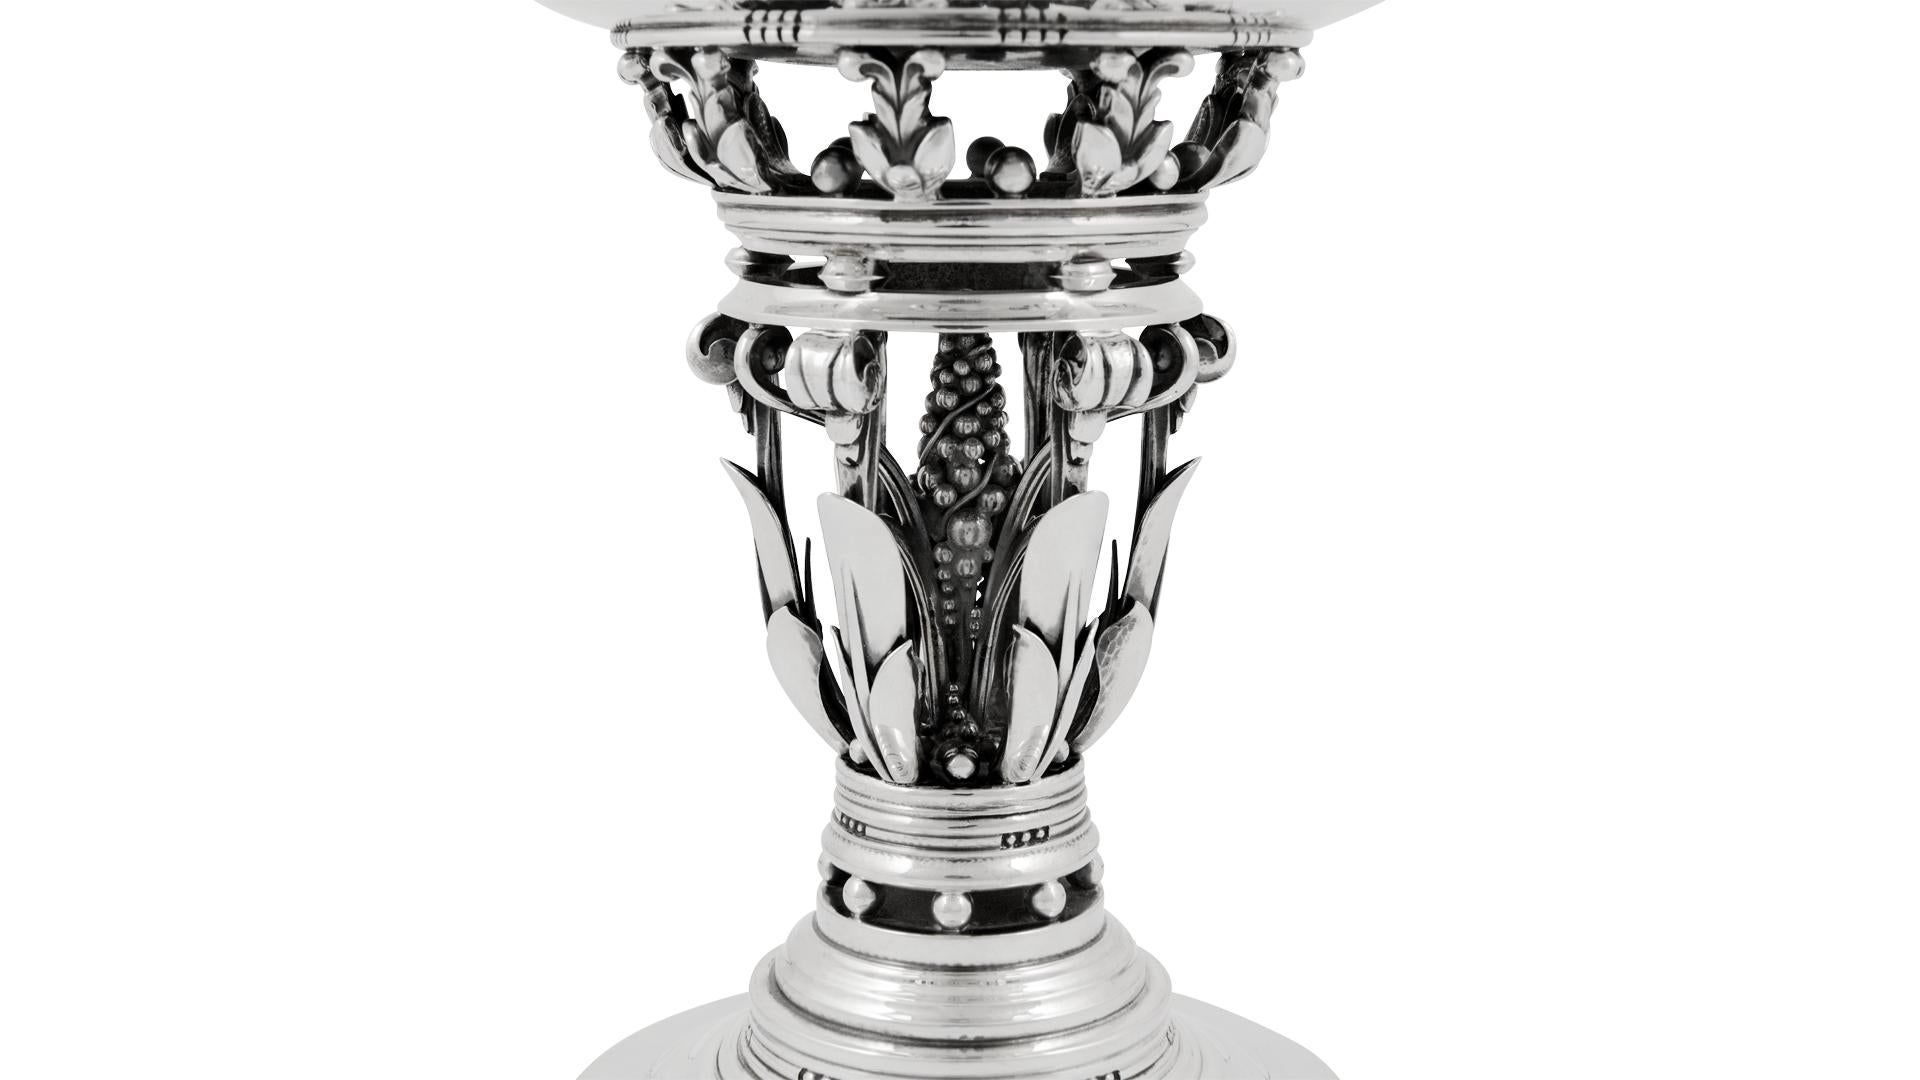 This is a large sterling silver Georg Jensen compote, design #252 by Johan Rohde from circa 1918 and known as the “Princess” bowl.
Classic Johan Rohde design with openwork stem decorated with leaves, berries and scrolls.
Measures 9